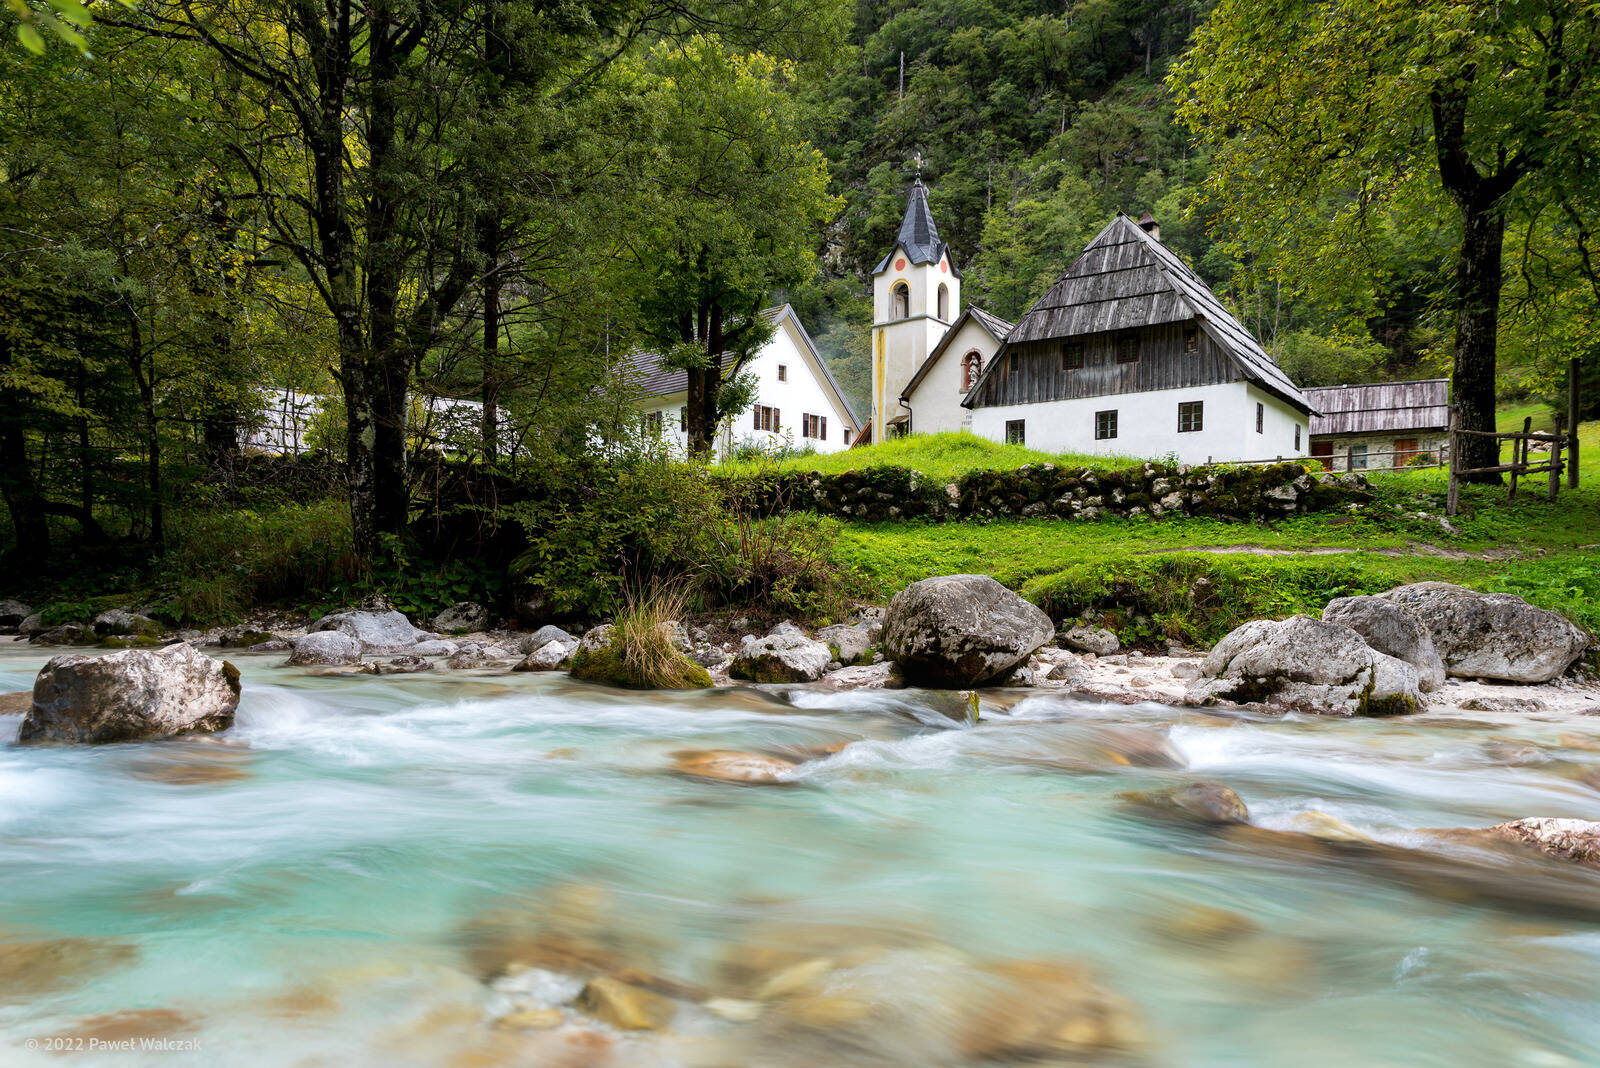 Image of Soča River and Church in Trenta Valley by Pe Wu